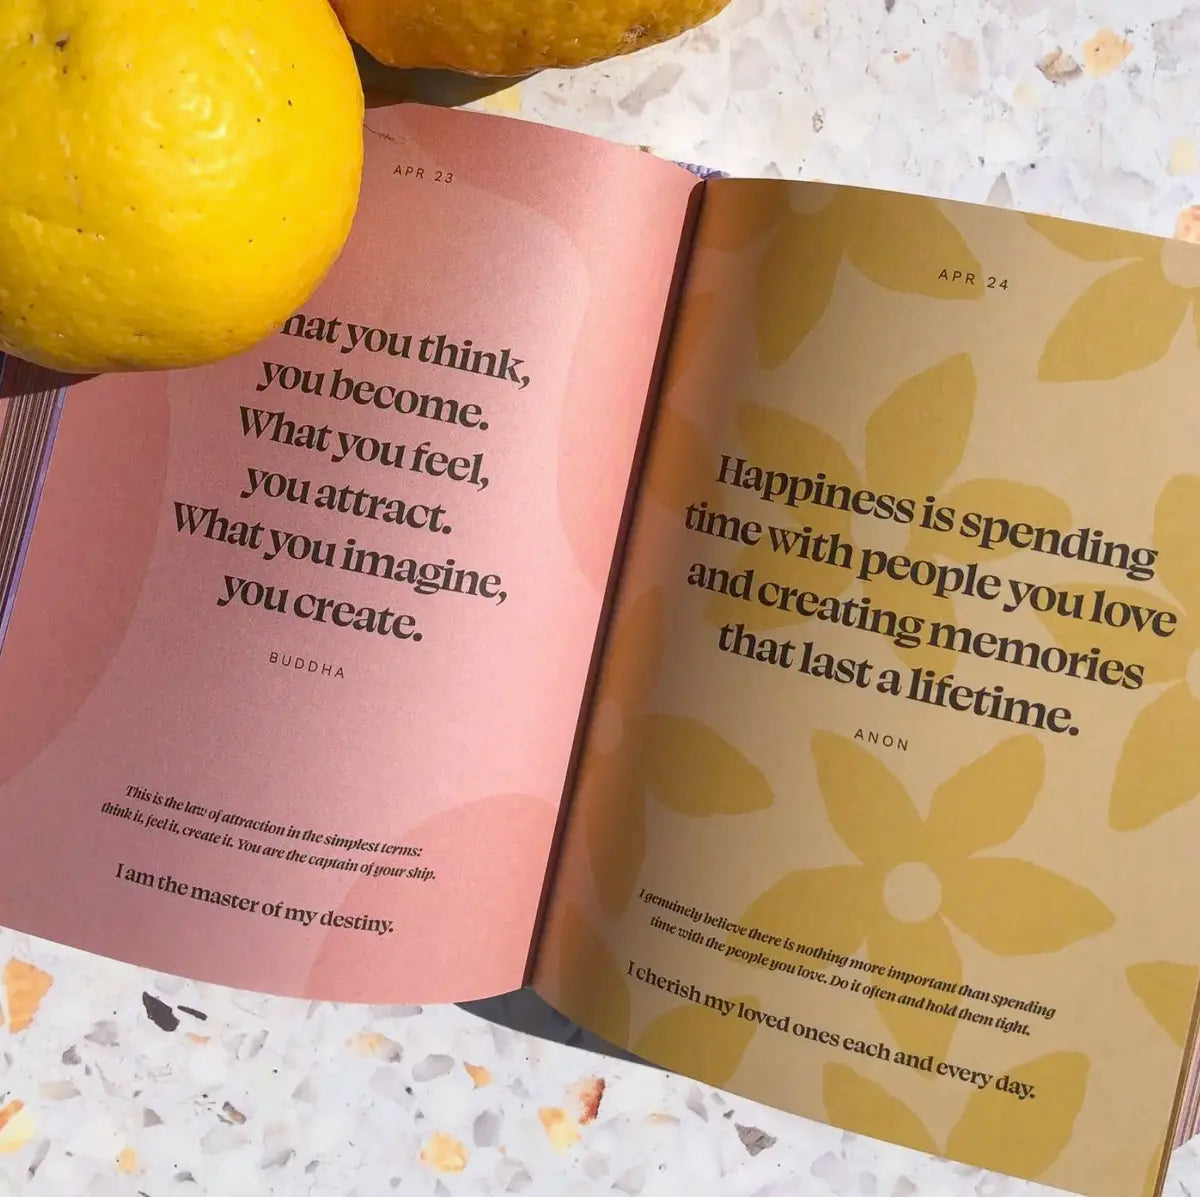 A curated book of quotes, Daily Mantras to Ignite Your Purpose - V3 by Collective Hub, with lemons next to it, providing inspiration.